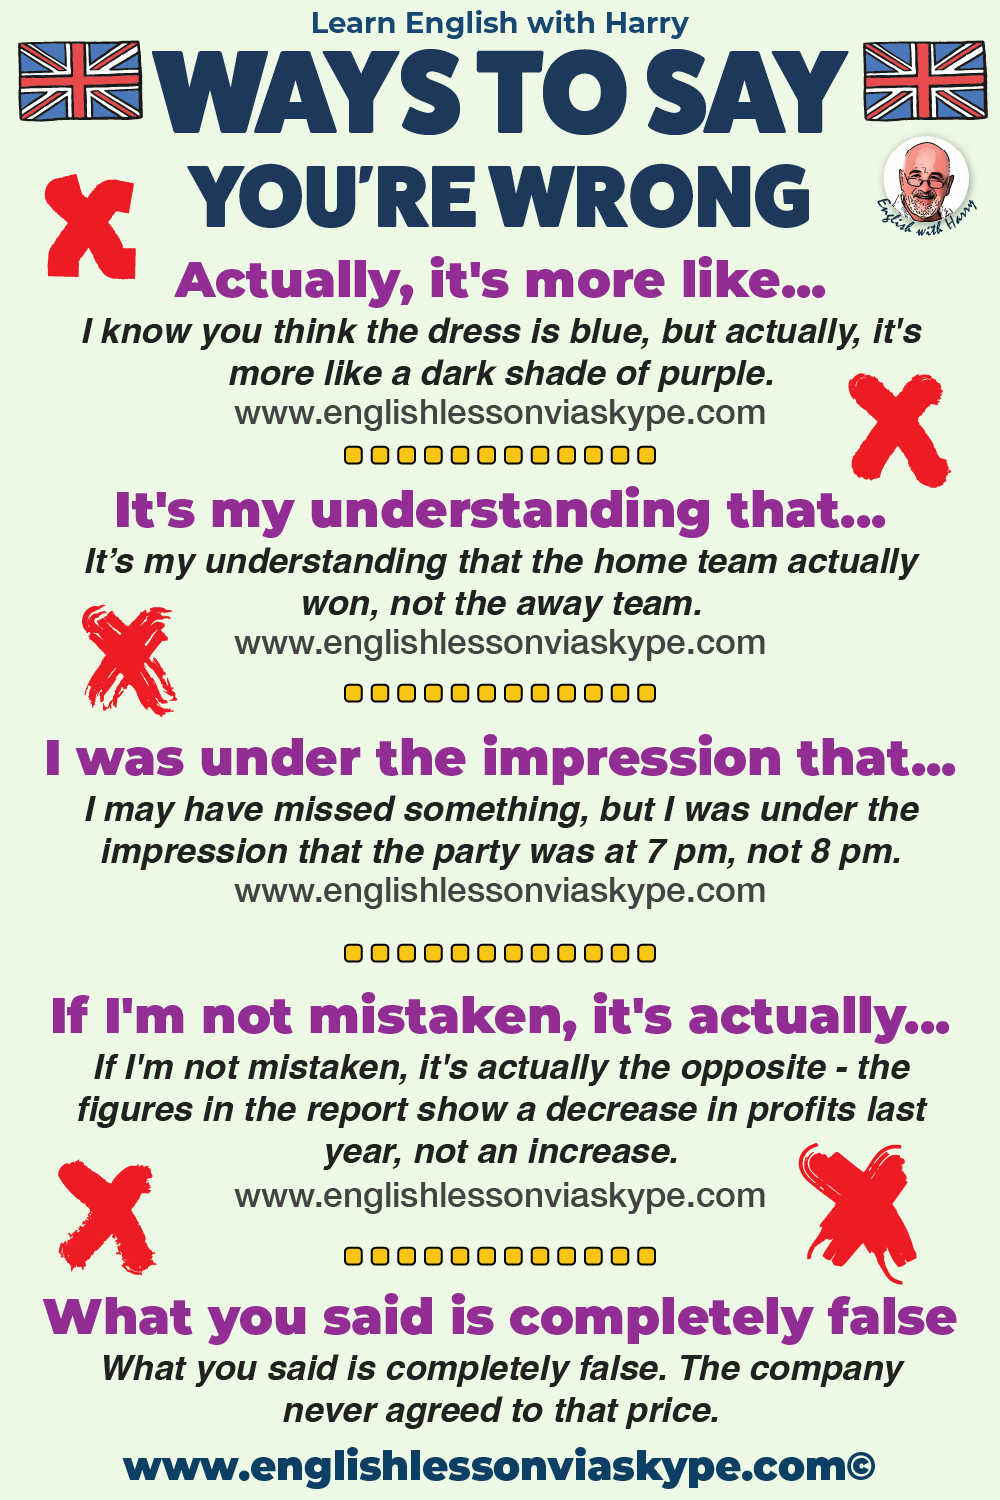 Ways to say you're wrong in English. English speaking skills. Improve English speaking skills. Upgrade your vocabulary. English grammar rules. Improve English speaking. Advanced English lessons on Zoom and Skype. Improve English speaking and writing skills. #learnenglish